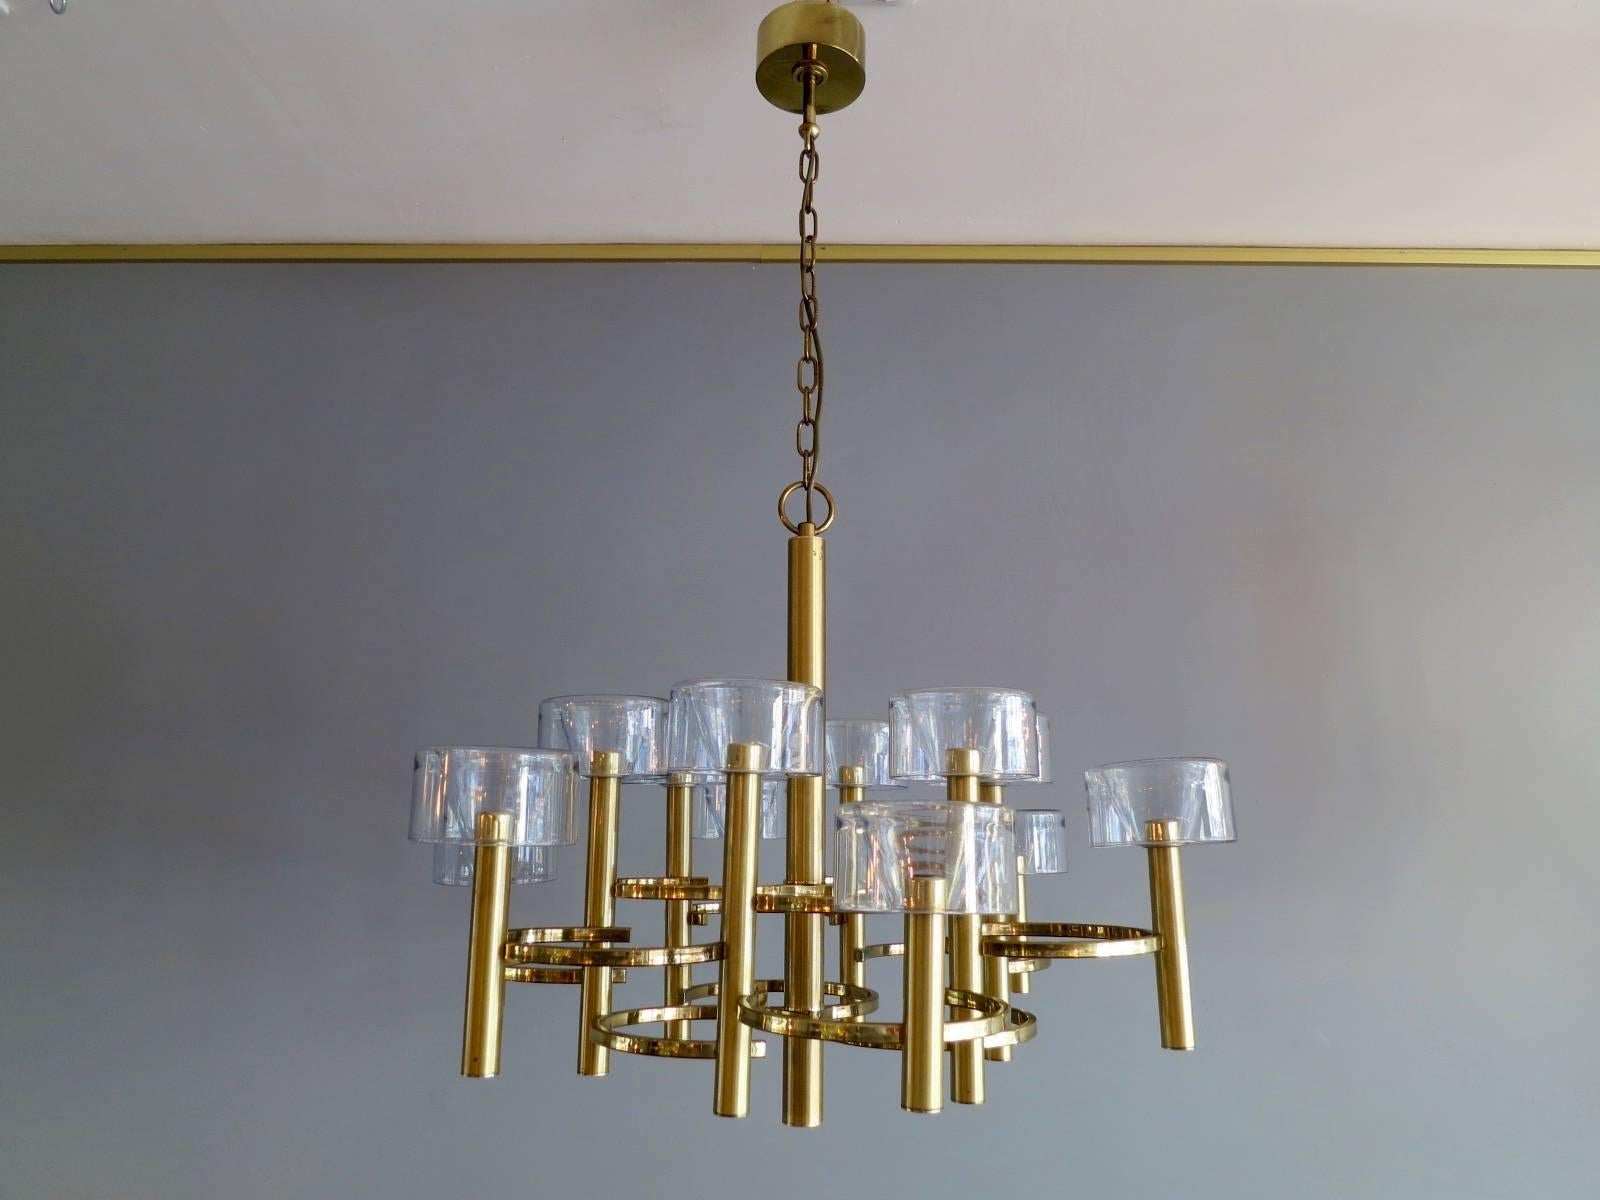 A modernist Italian chandelier by Sciolari in brass with moulded glass diffusers and geometric design.